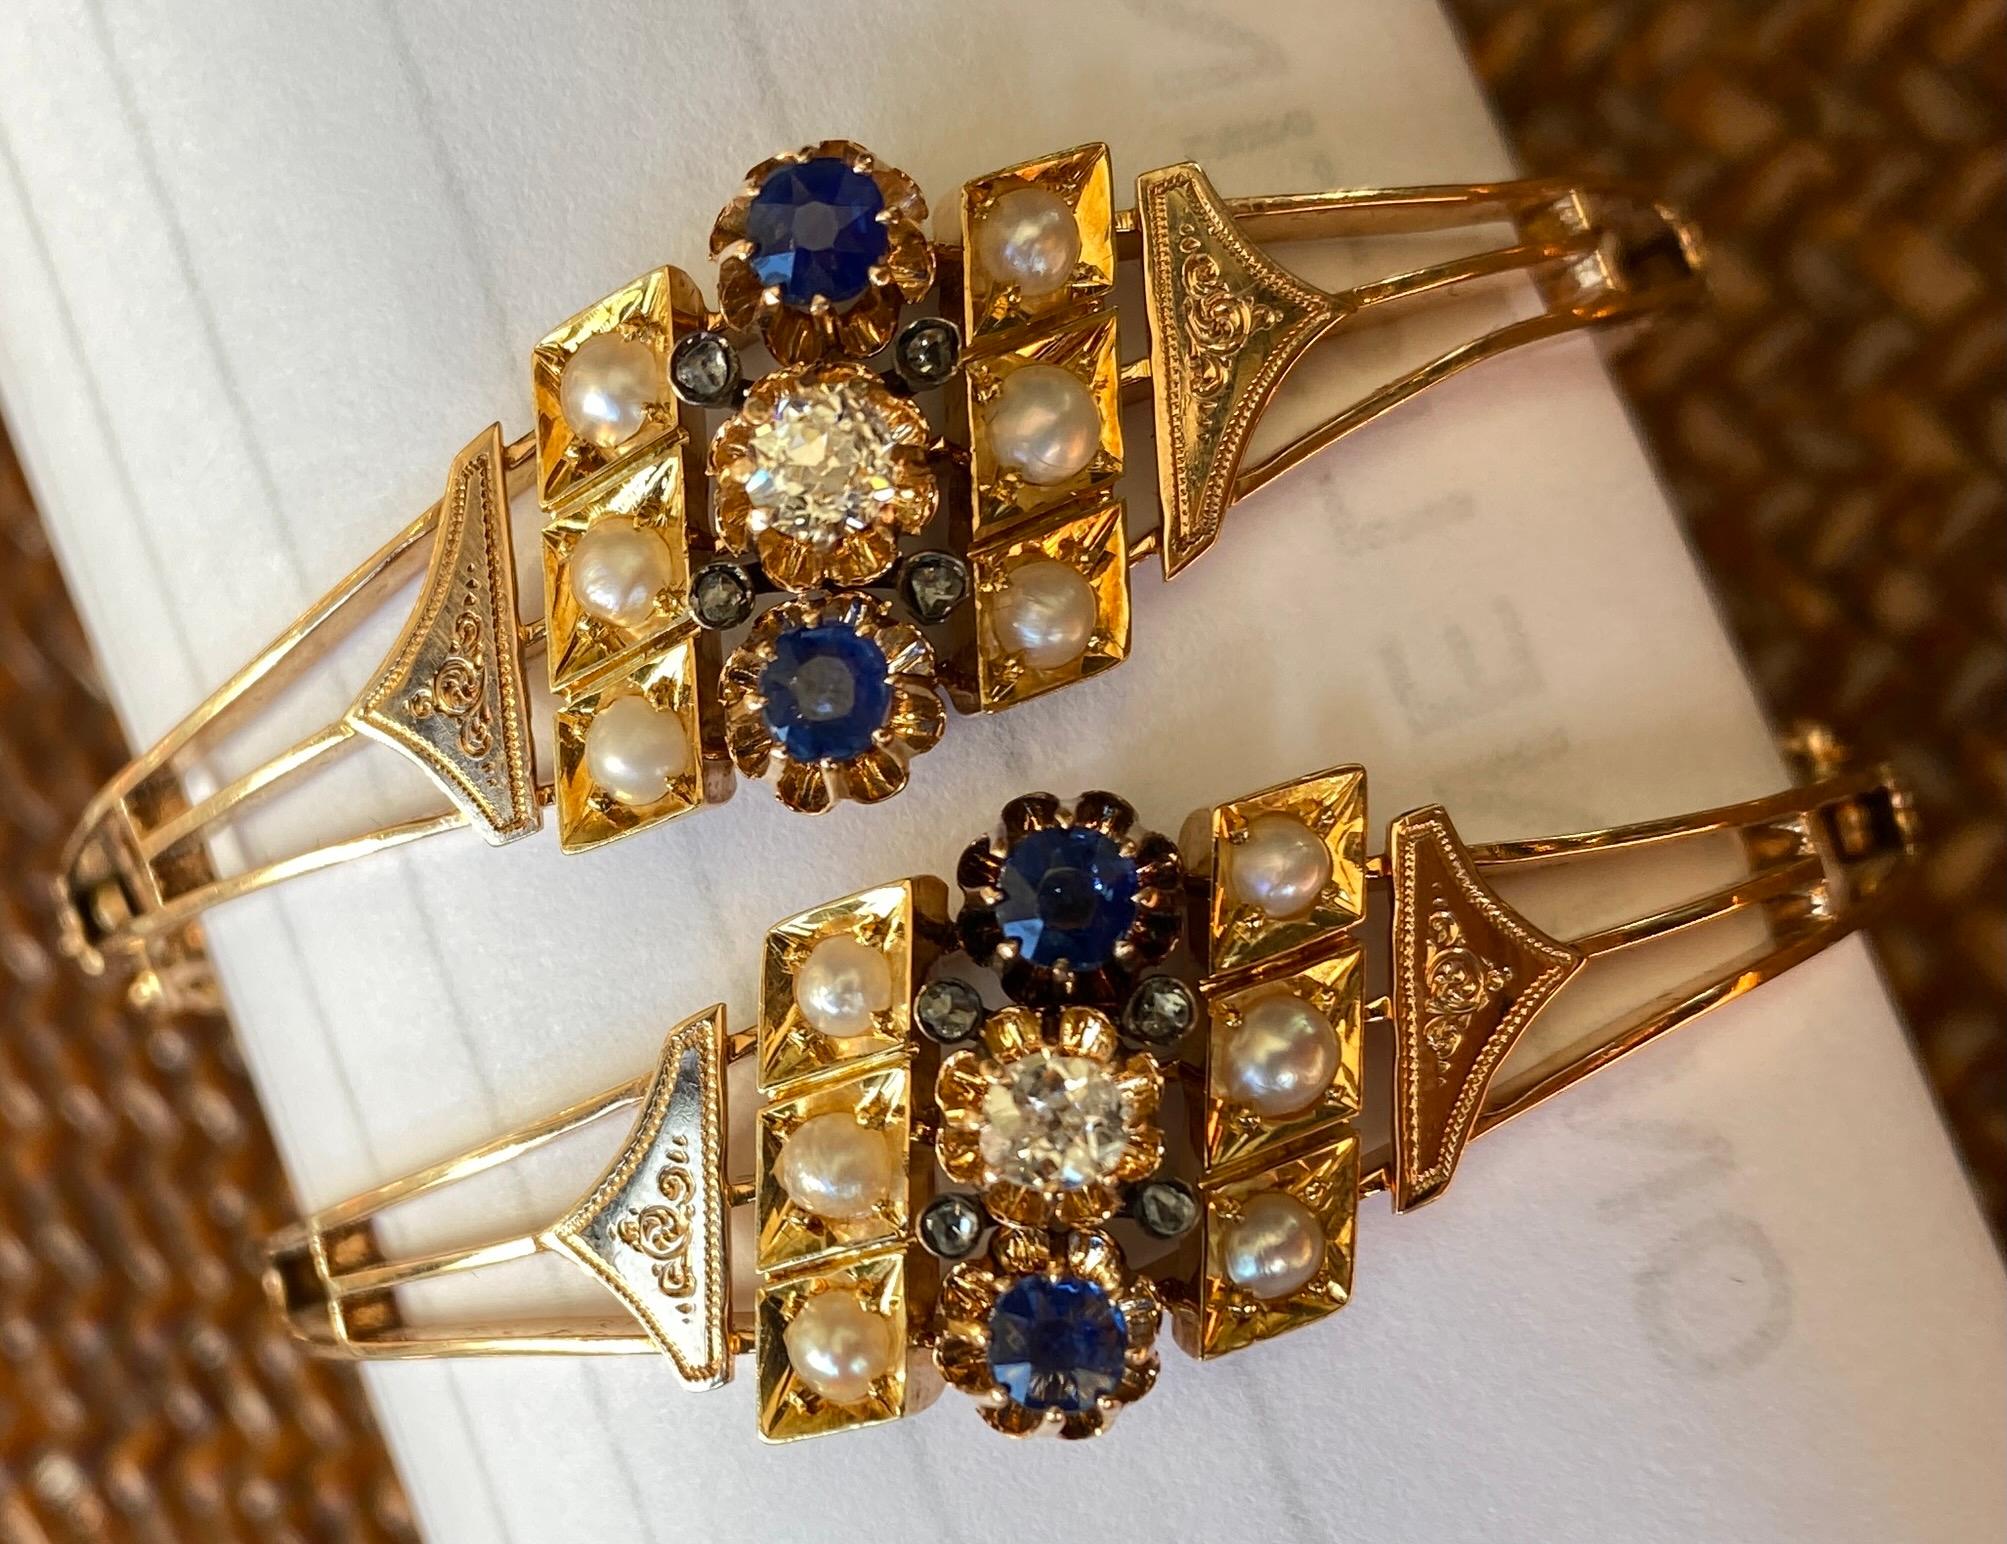 Pair of Antique 1891 Victorian 14k Gold Sapphire, Diamond, Pearl Wedding Bangles For Sale 4